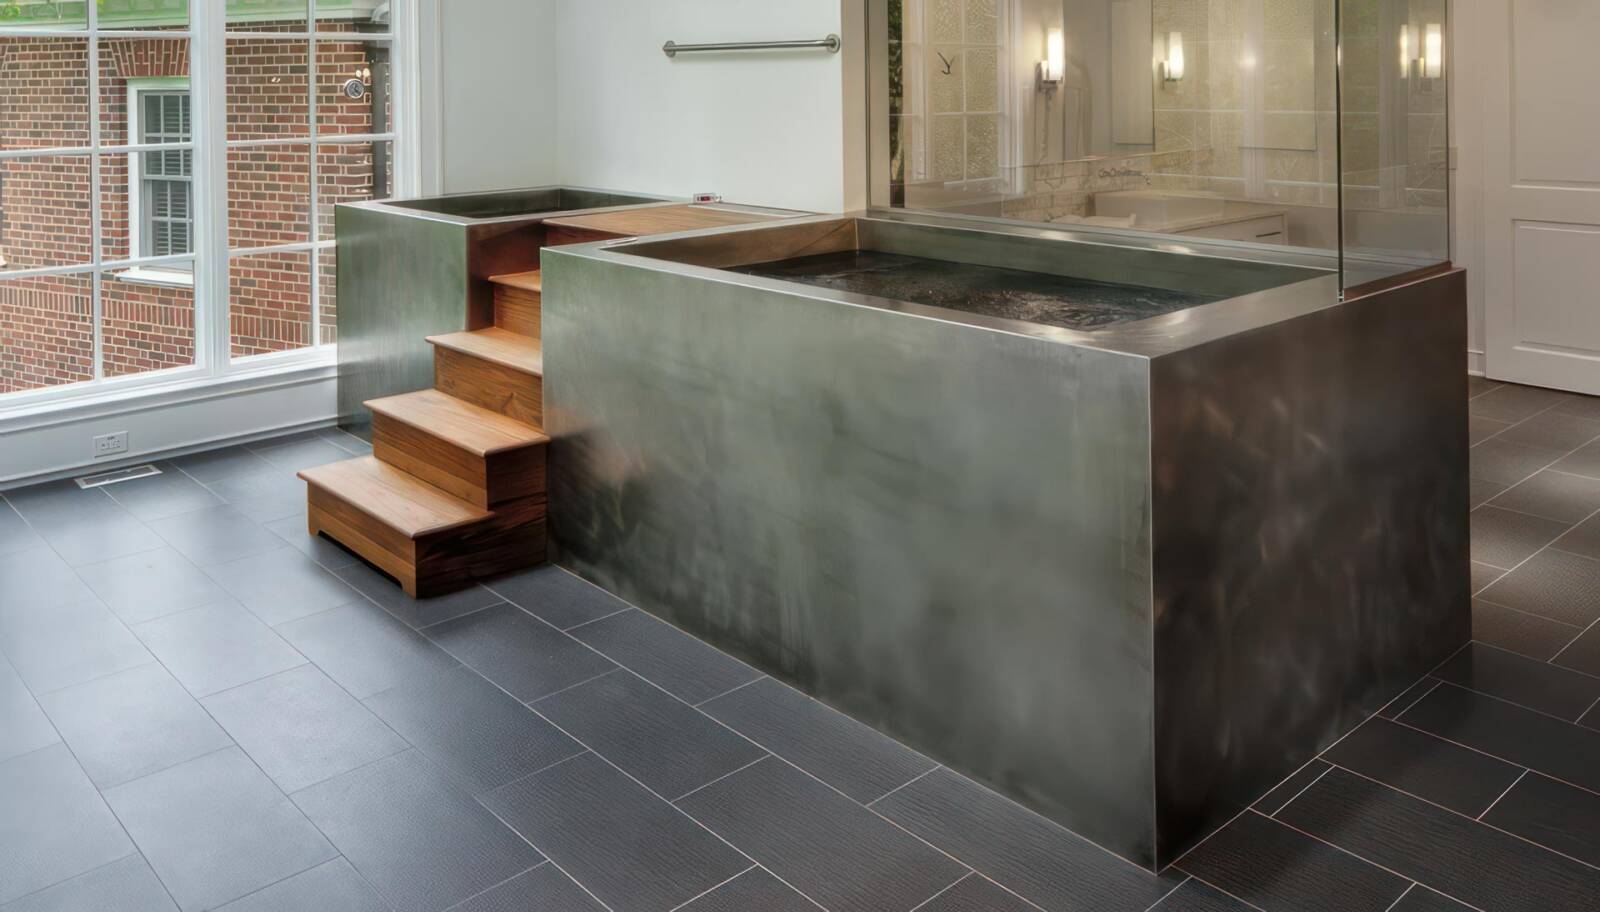 What Are the Benefits of Cold Plunge Pools?